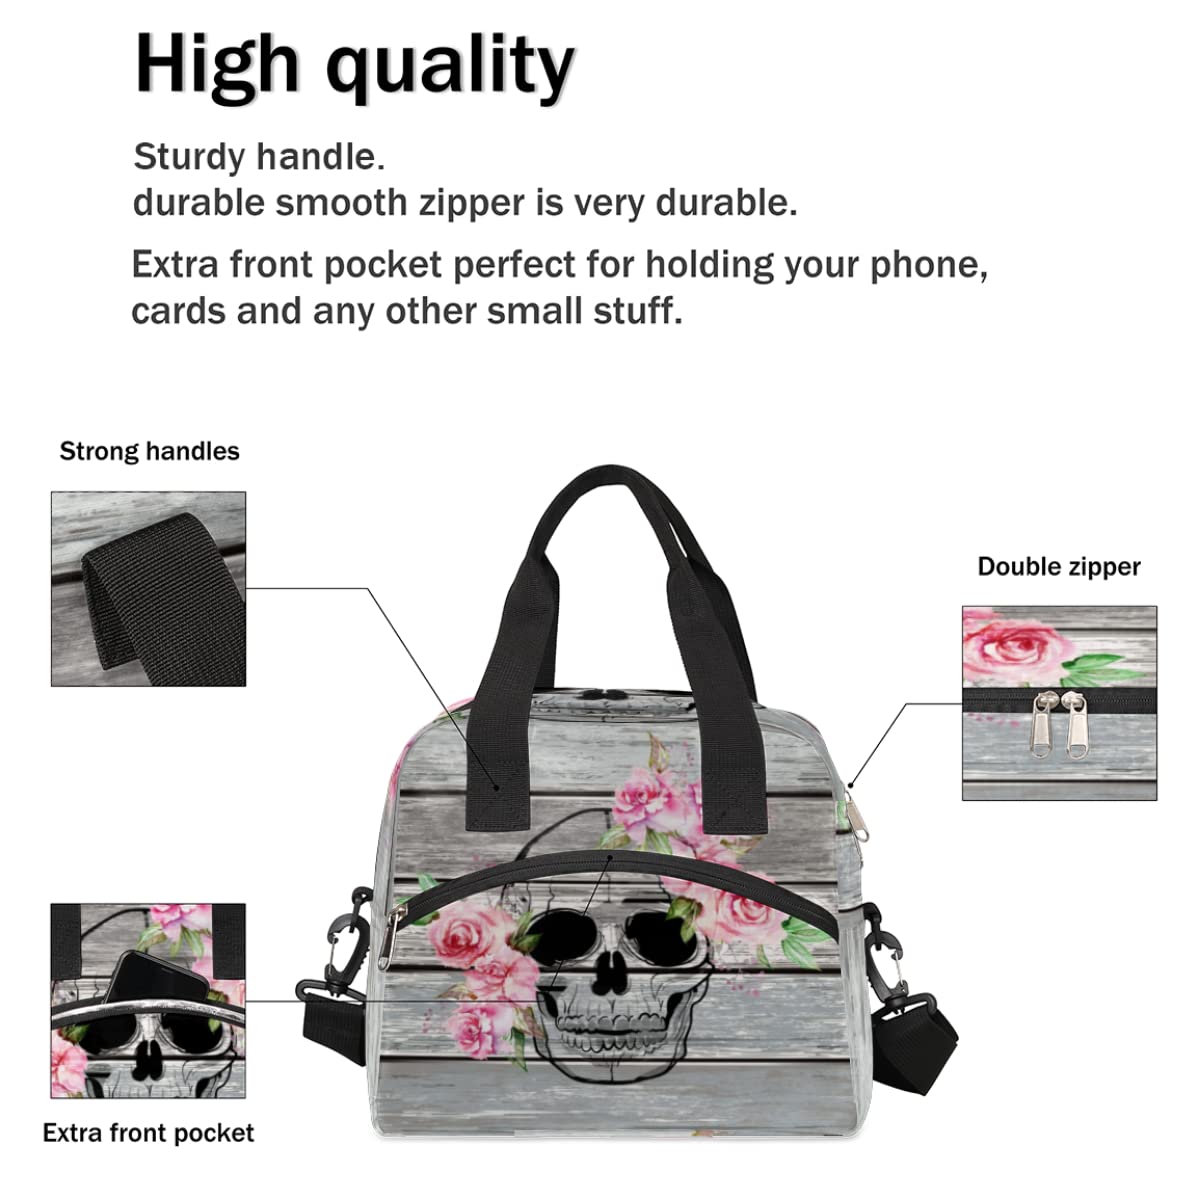 Insulated Lunch Bag for Women Men Rustic Wood Goth Skull Pink Flower Lunch Box Reusable Lunch Cooler Bag Large Lunch Tote Bag for Work Picnic Travel School